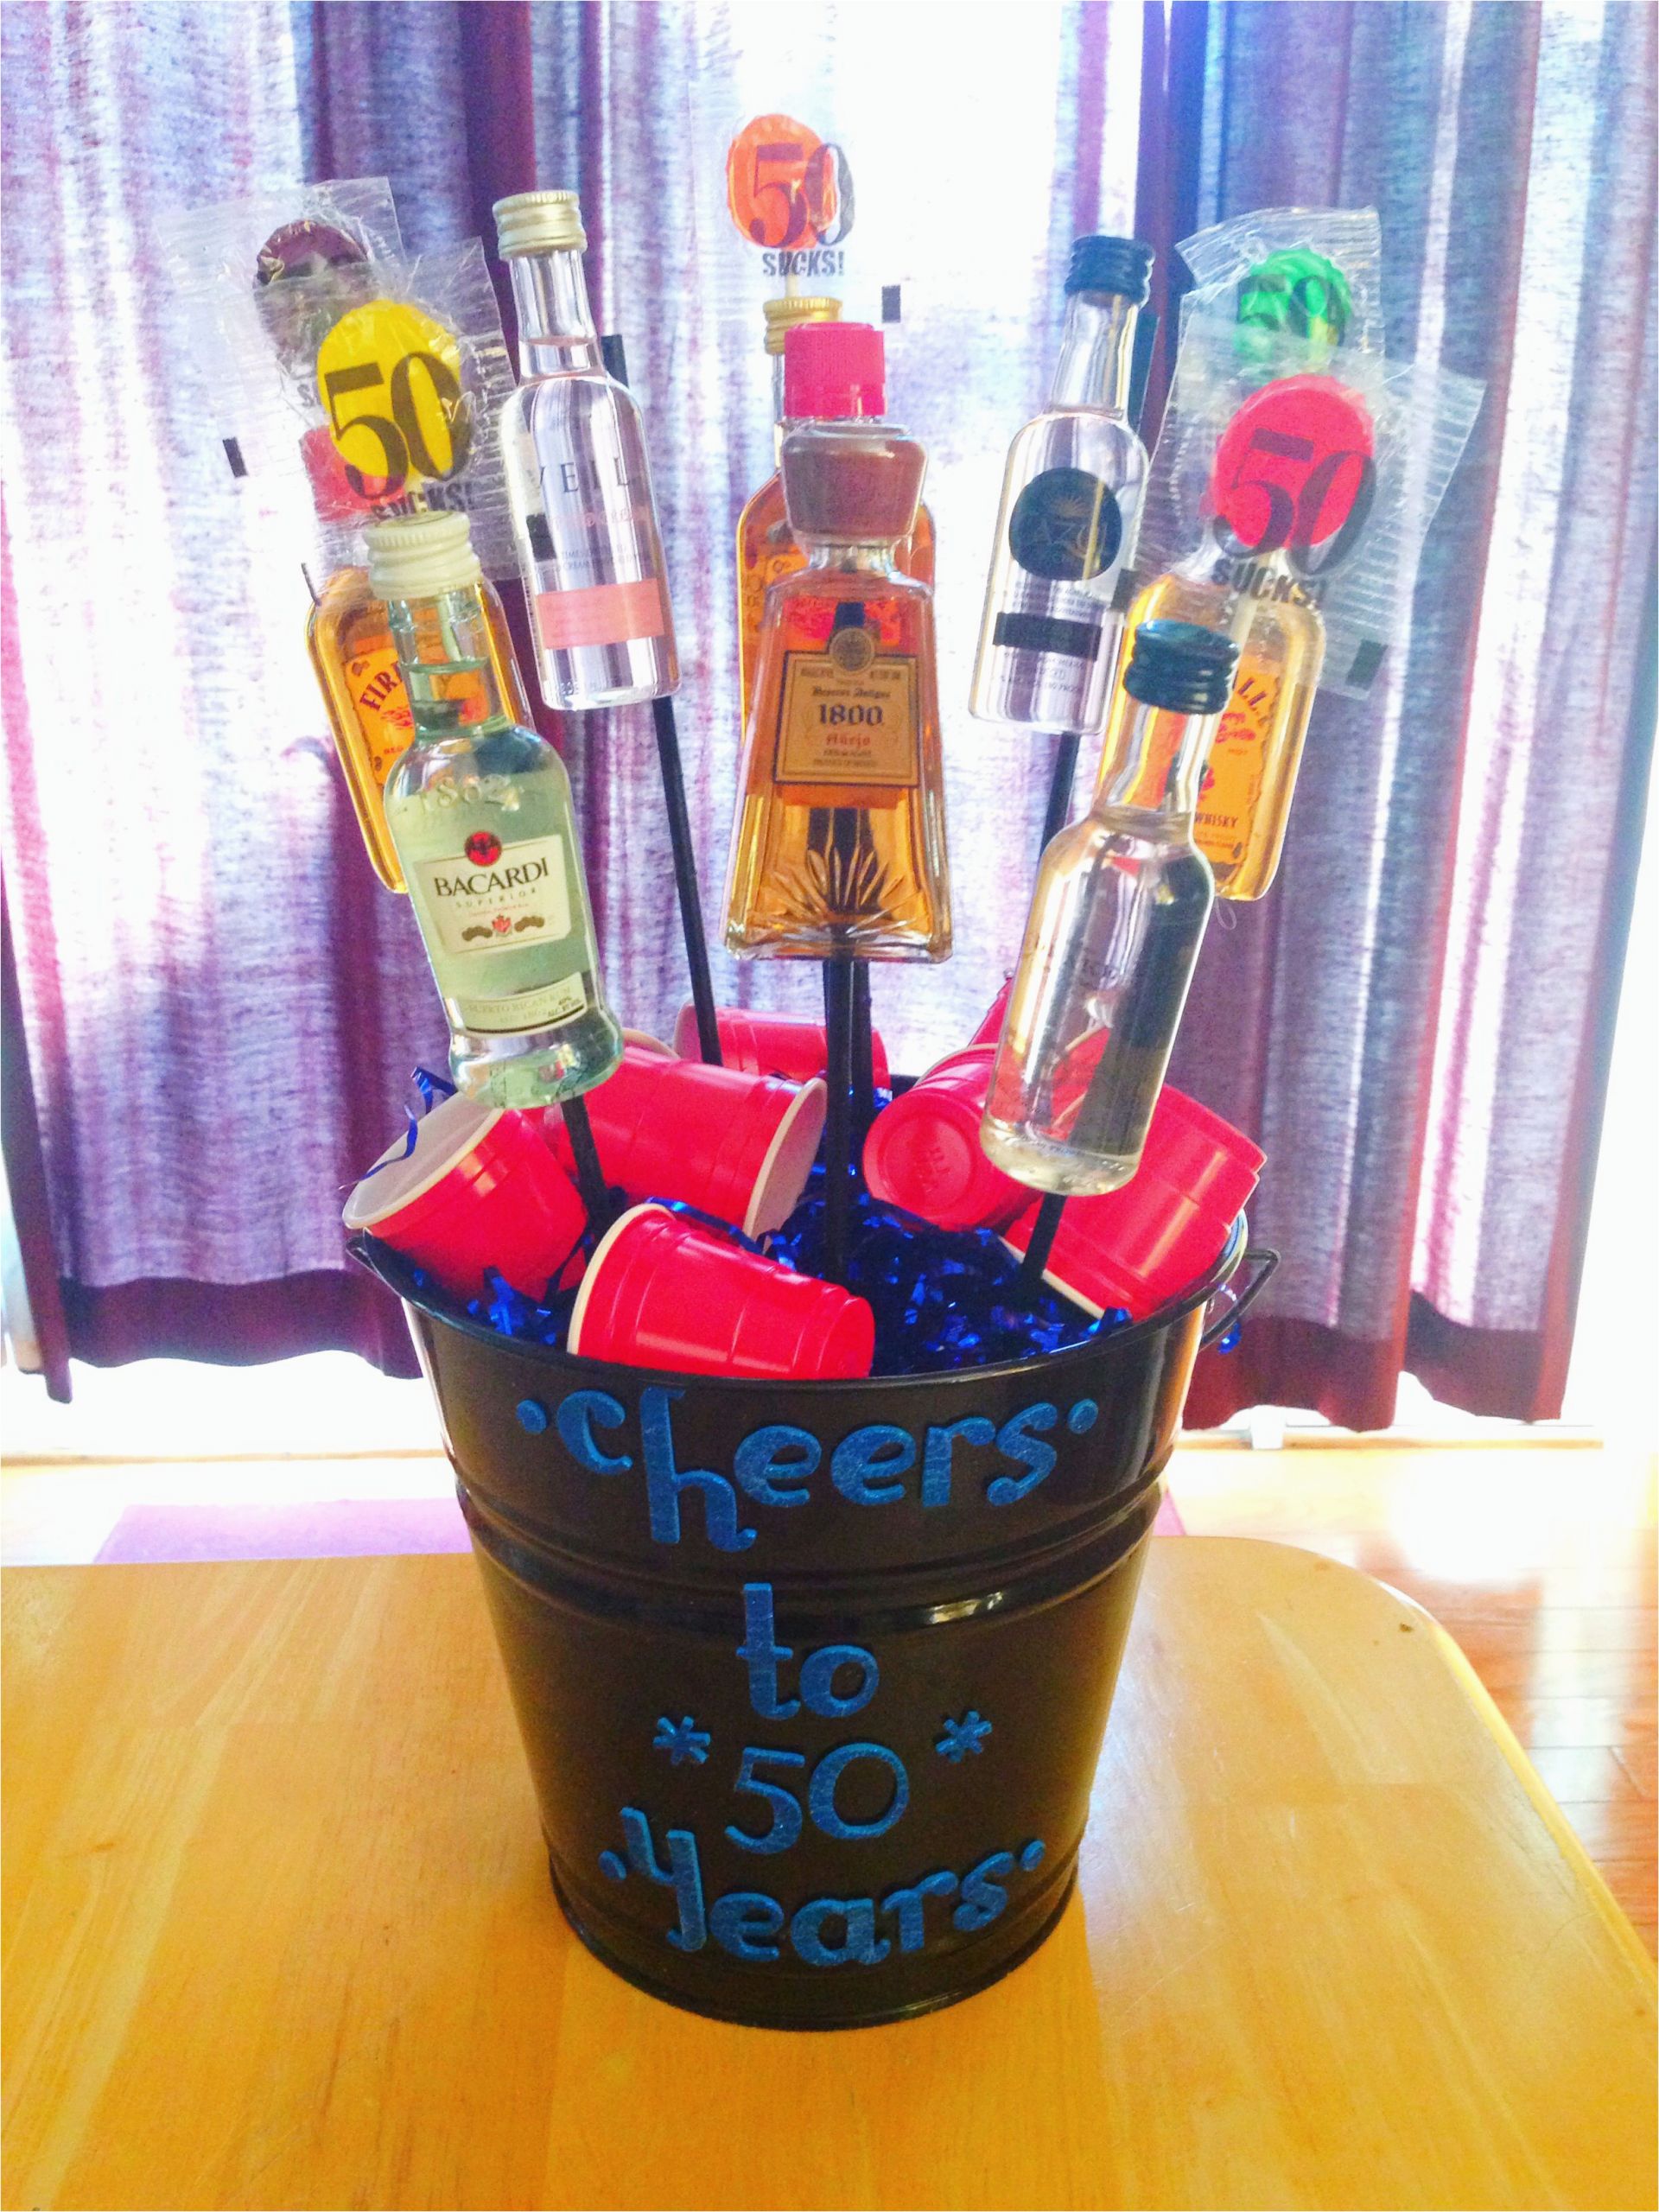 Birthday Present for 50 Years Old Man Alcohol Gift for Over 21 Year Olds Pinterest Inspired